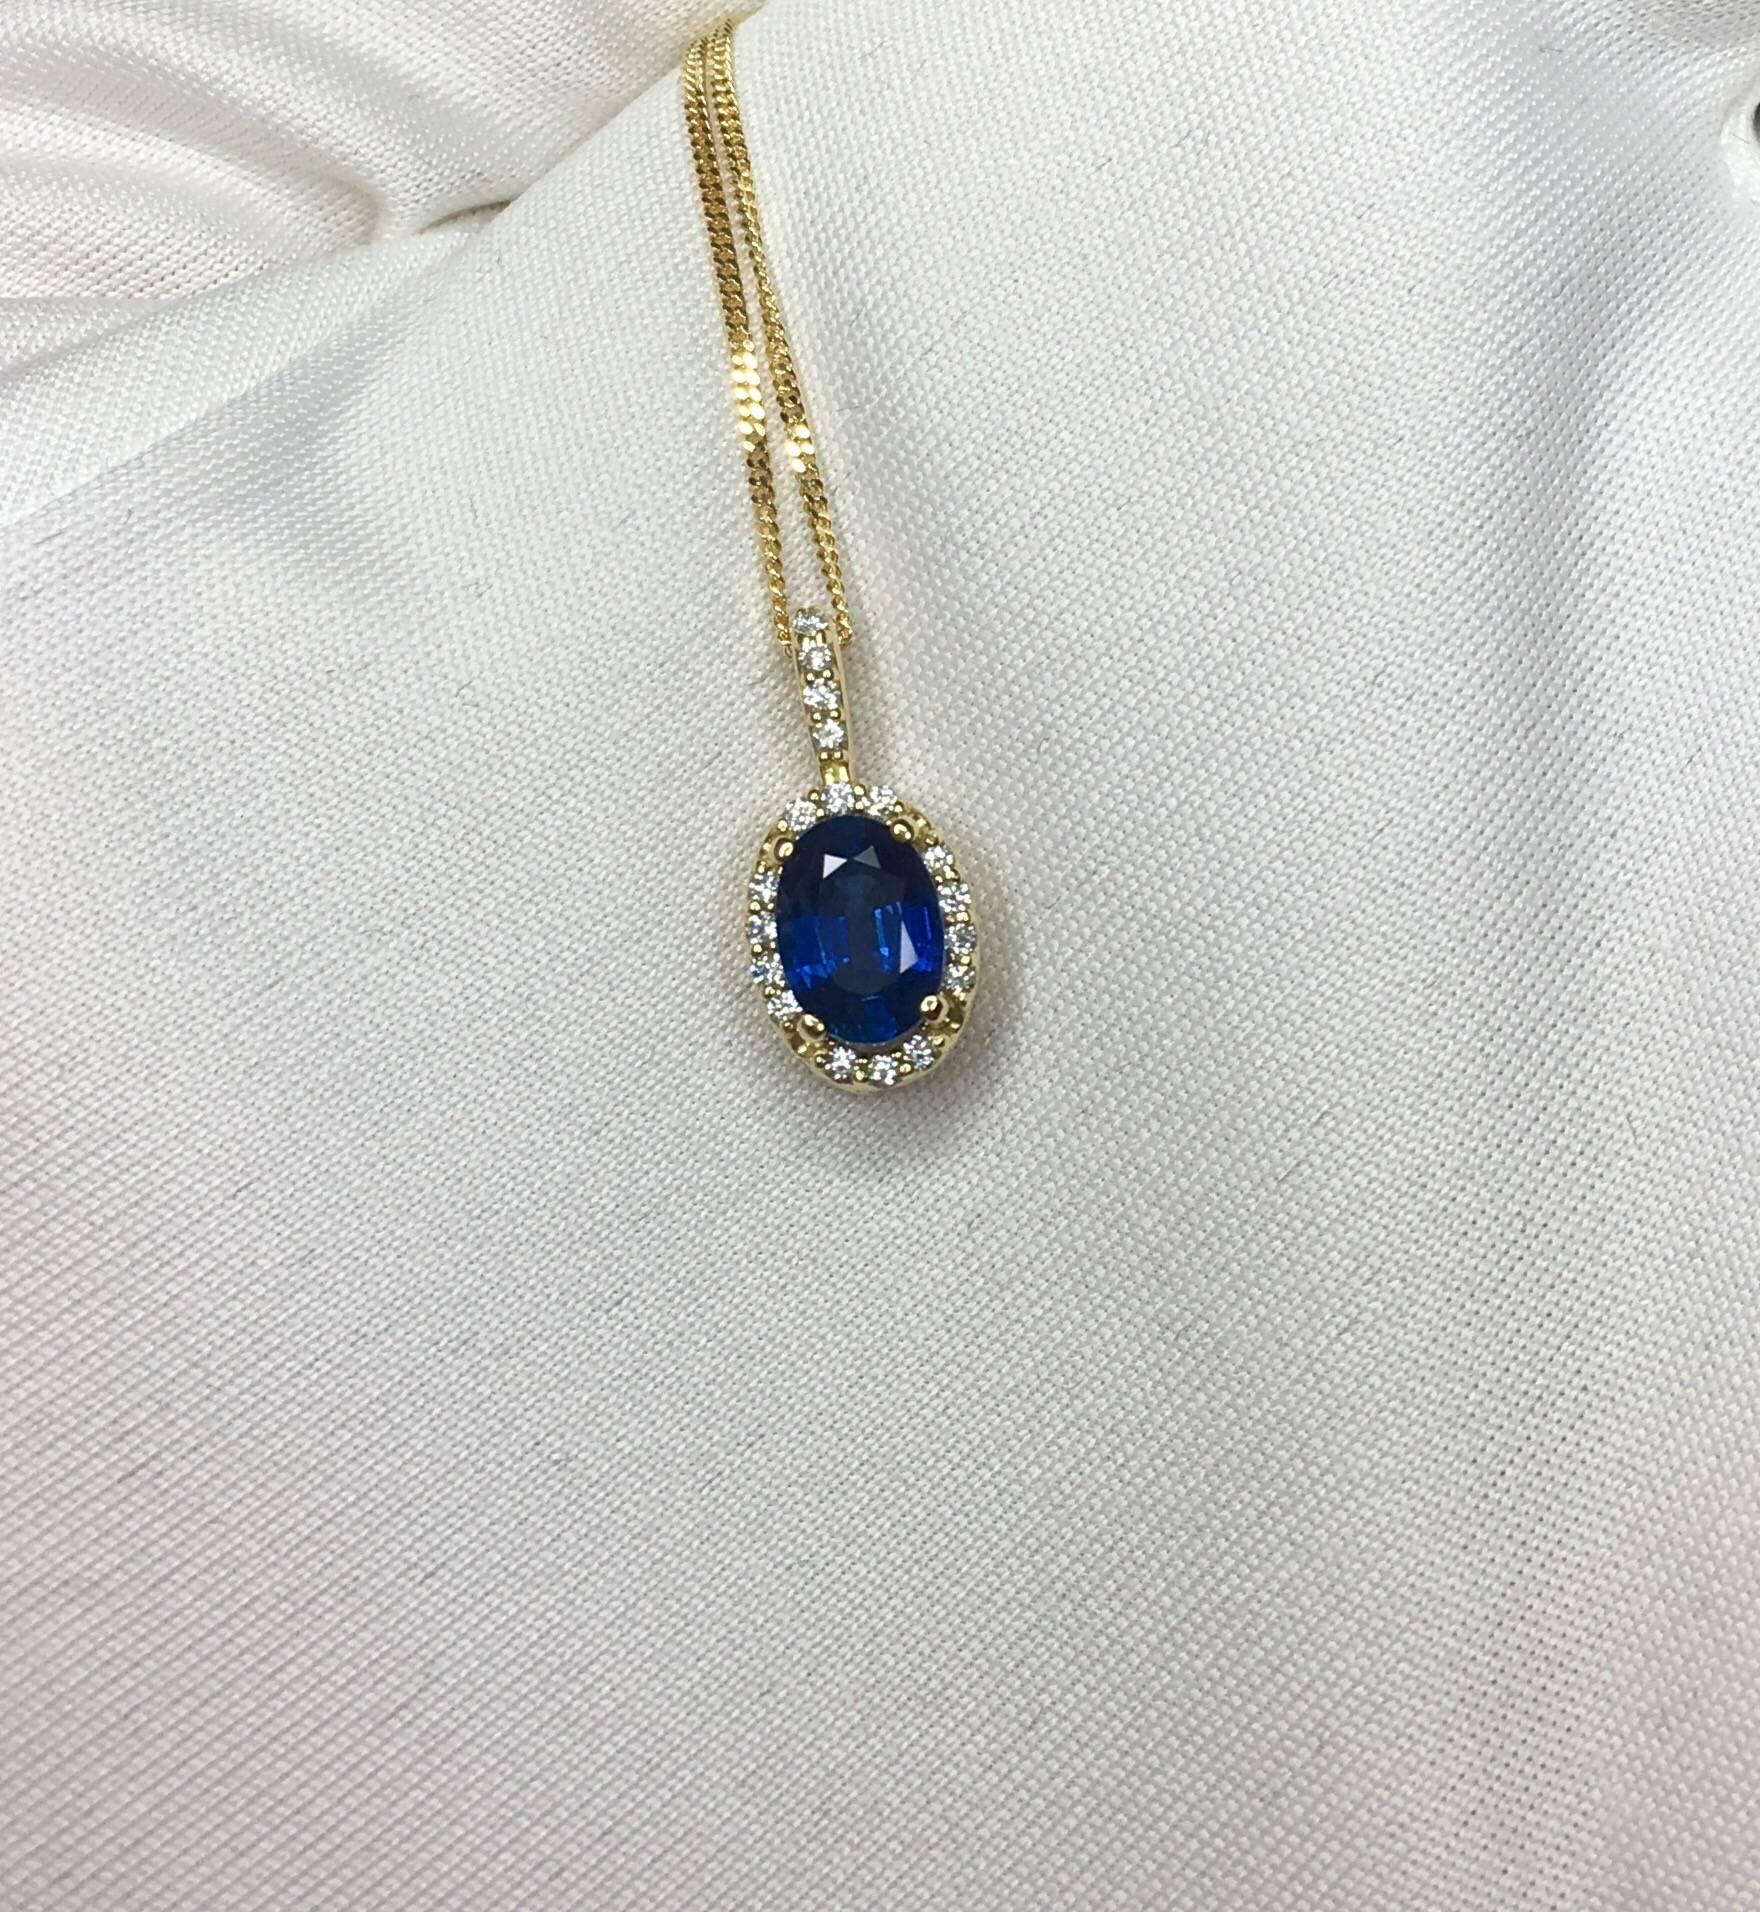 Stunning natural deep blue Ceylon sapphire set in a fine 18k yellow gold diamond cluster/halo Pendant. 

1.00 carat centre sapphire with stunning blue colour and very good clarity.

Surrounded by 0.101ct of colourless diamonds with G/H colour and